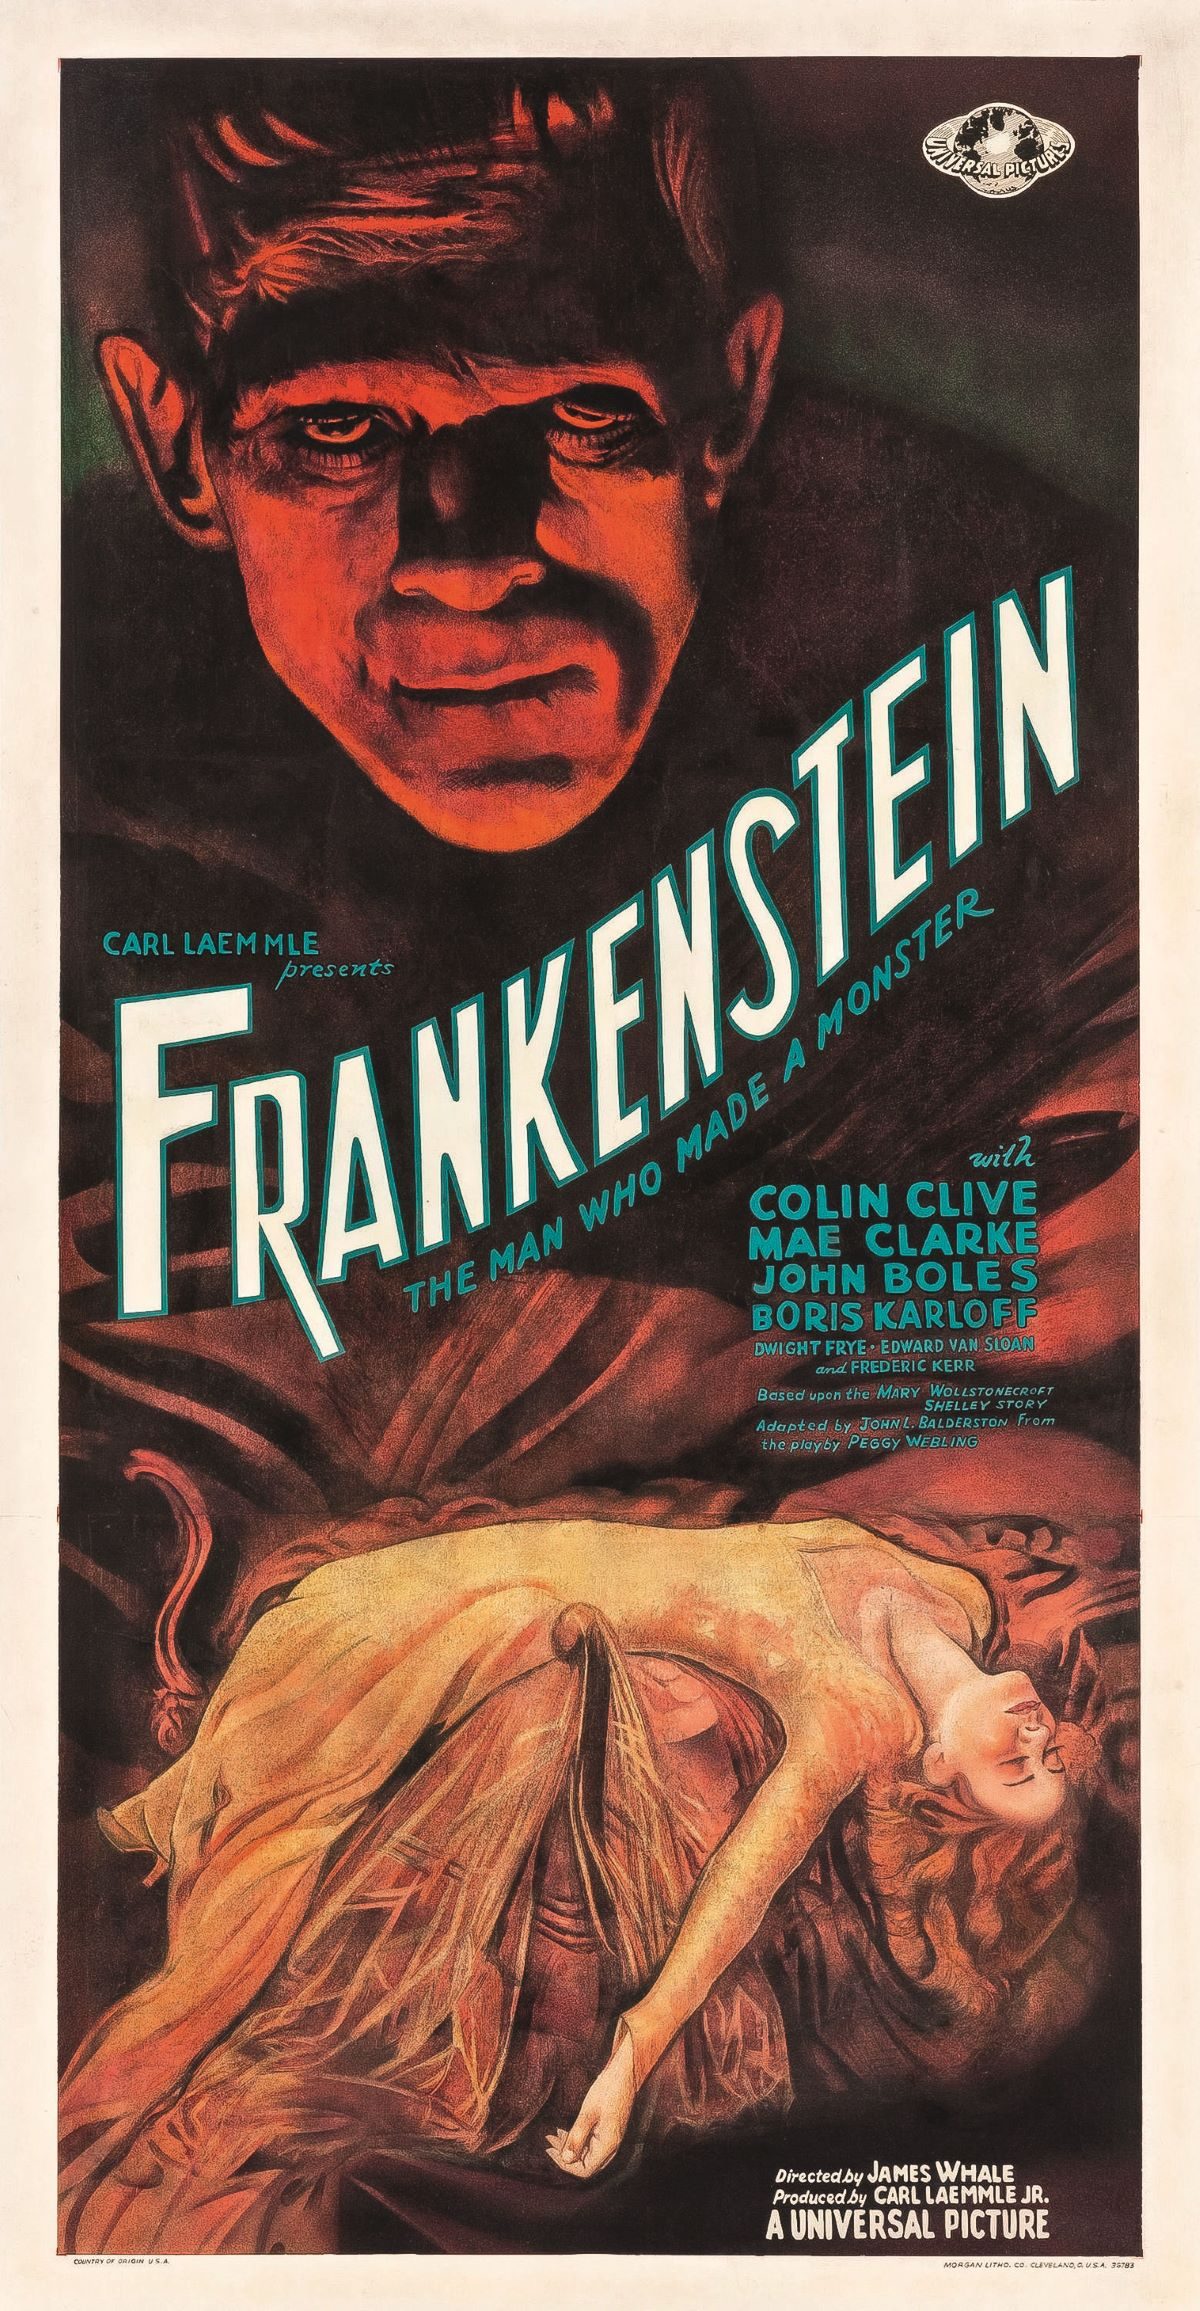 Frankenstein, Boris Karloff, Karoly Grosz, Colin Clive, James Whale, Mary Shelley, film, book, posters, movie posters